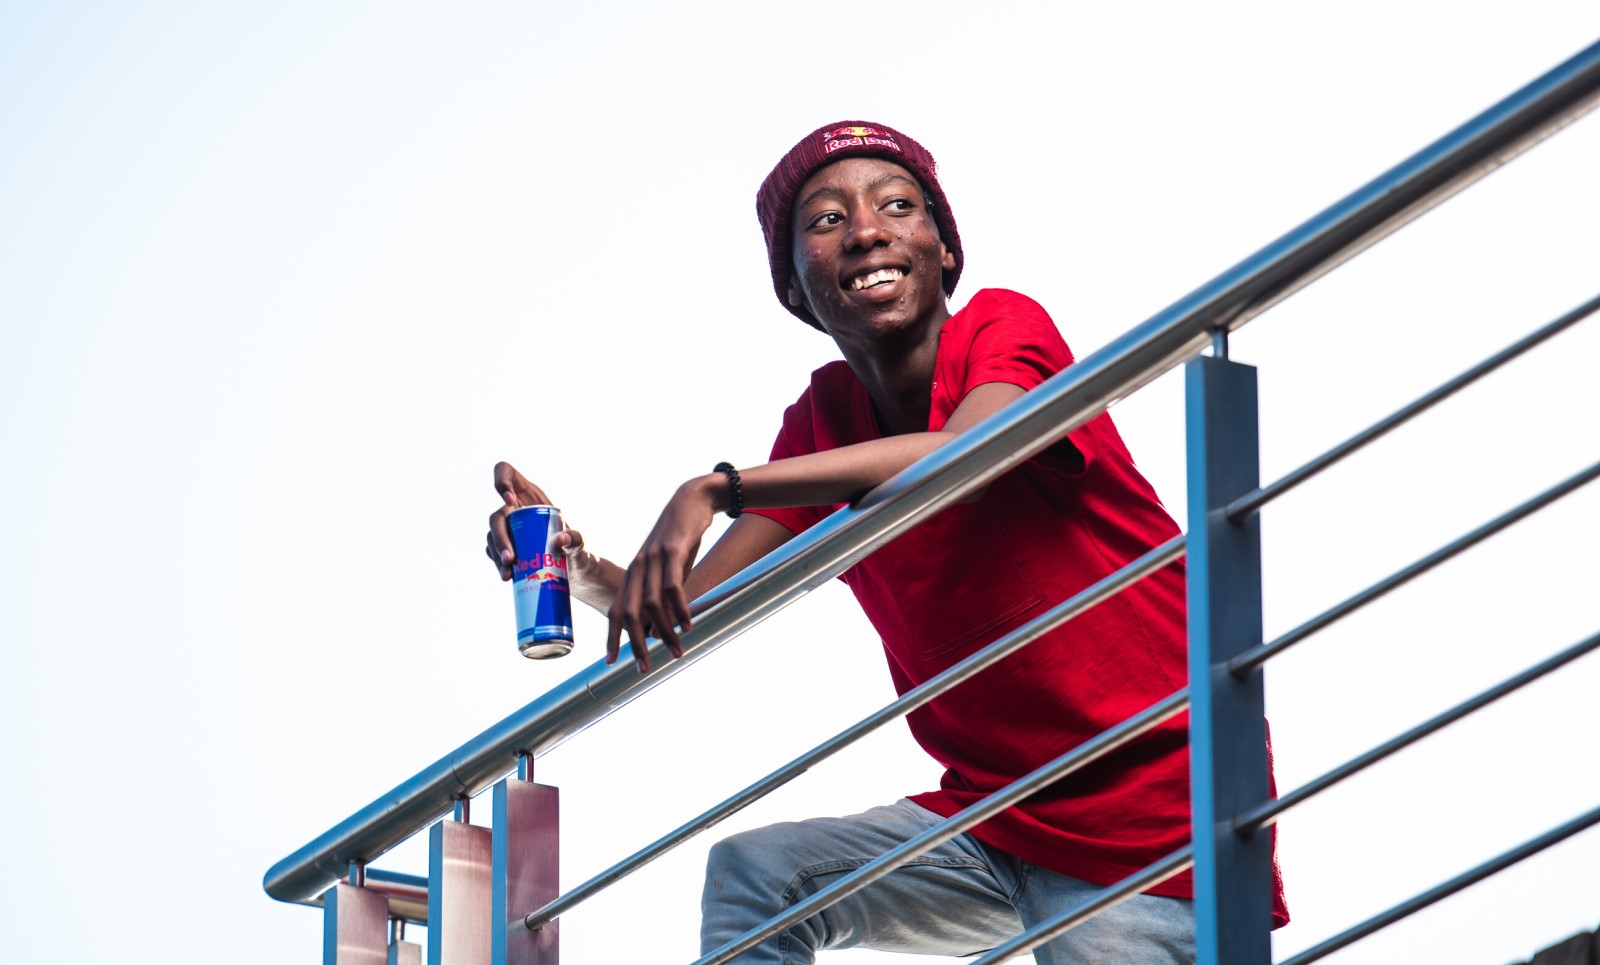 Fritagelse Minister Panda New Red Bull Unfold episode profiles SA esports star Thabo "Yvng Savage"  Moloi - Gearburn